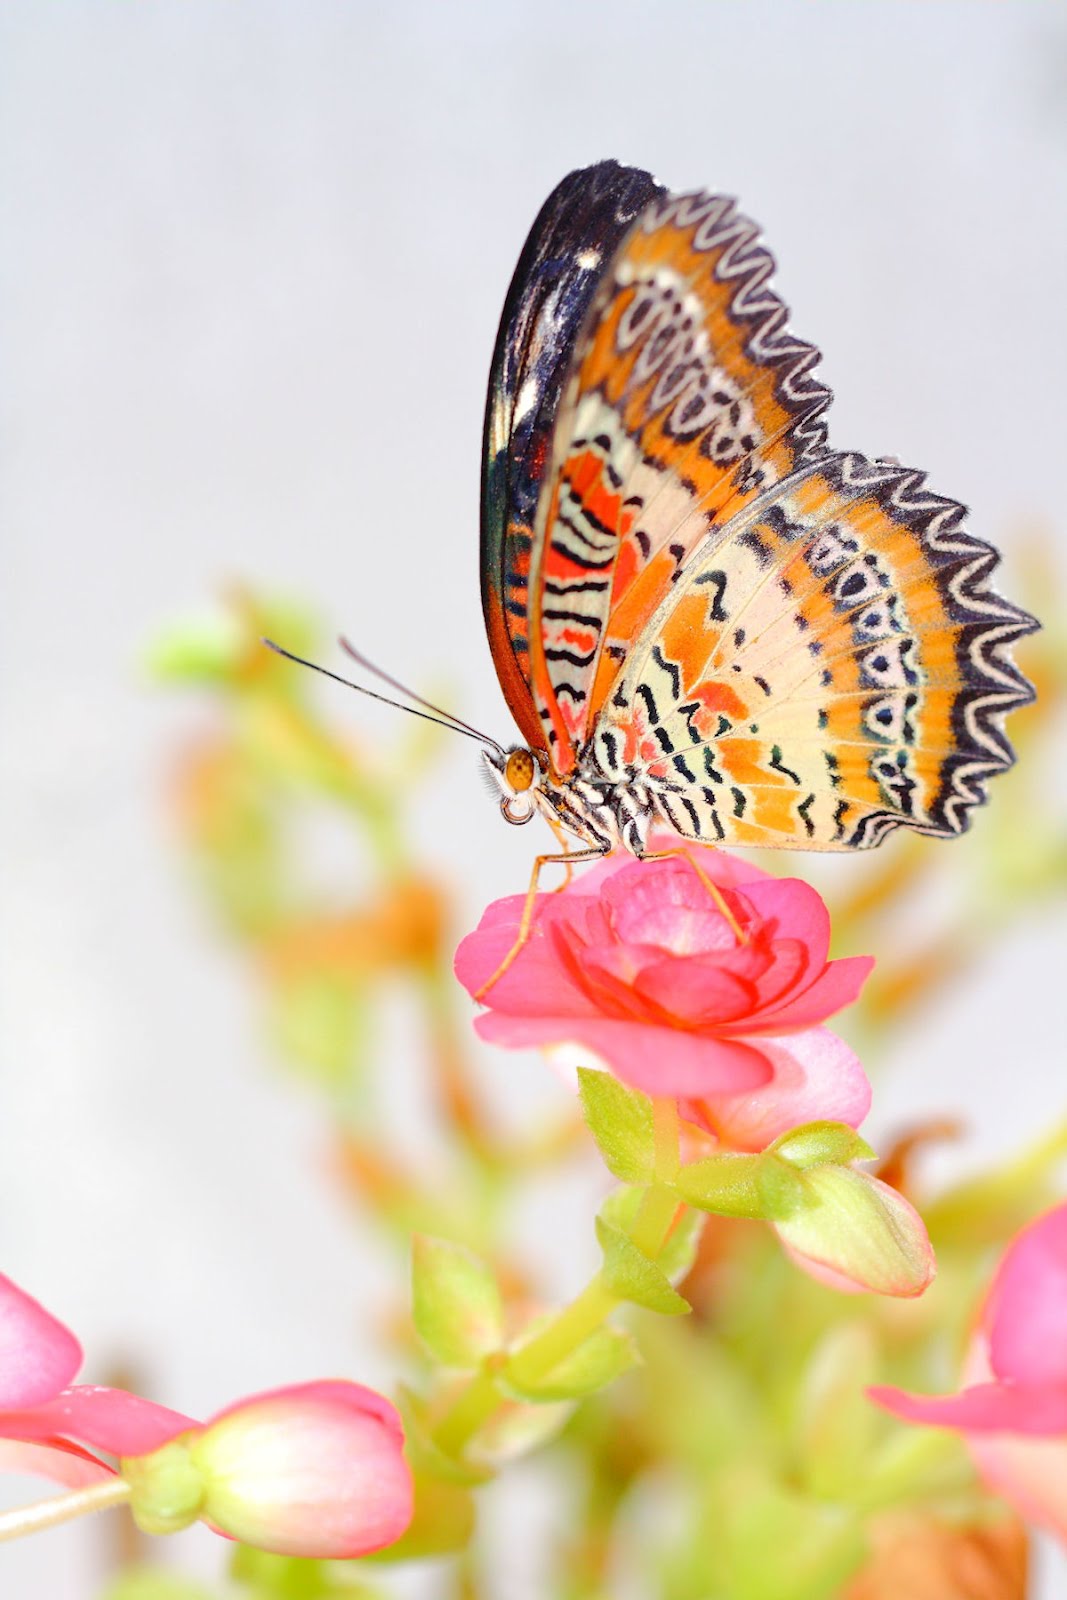 Mariposa sobre las flores - Butterfly and flowers